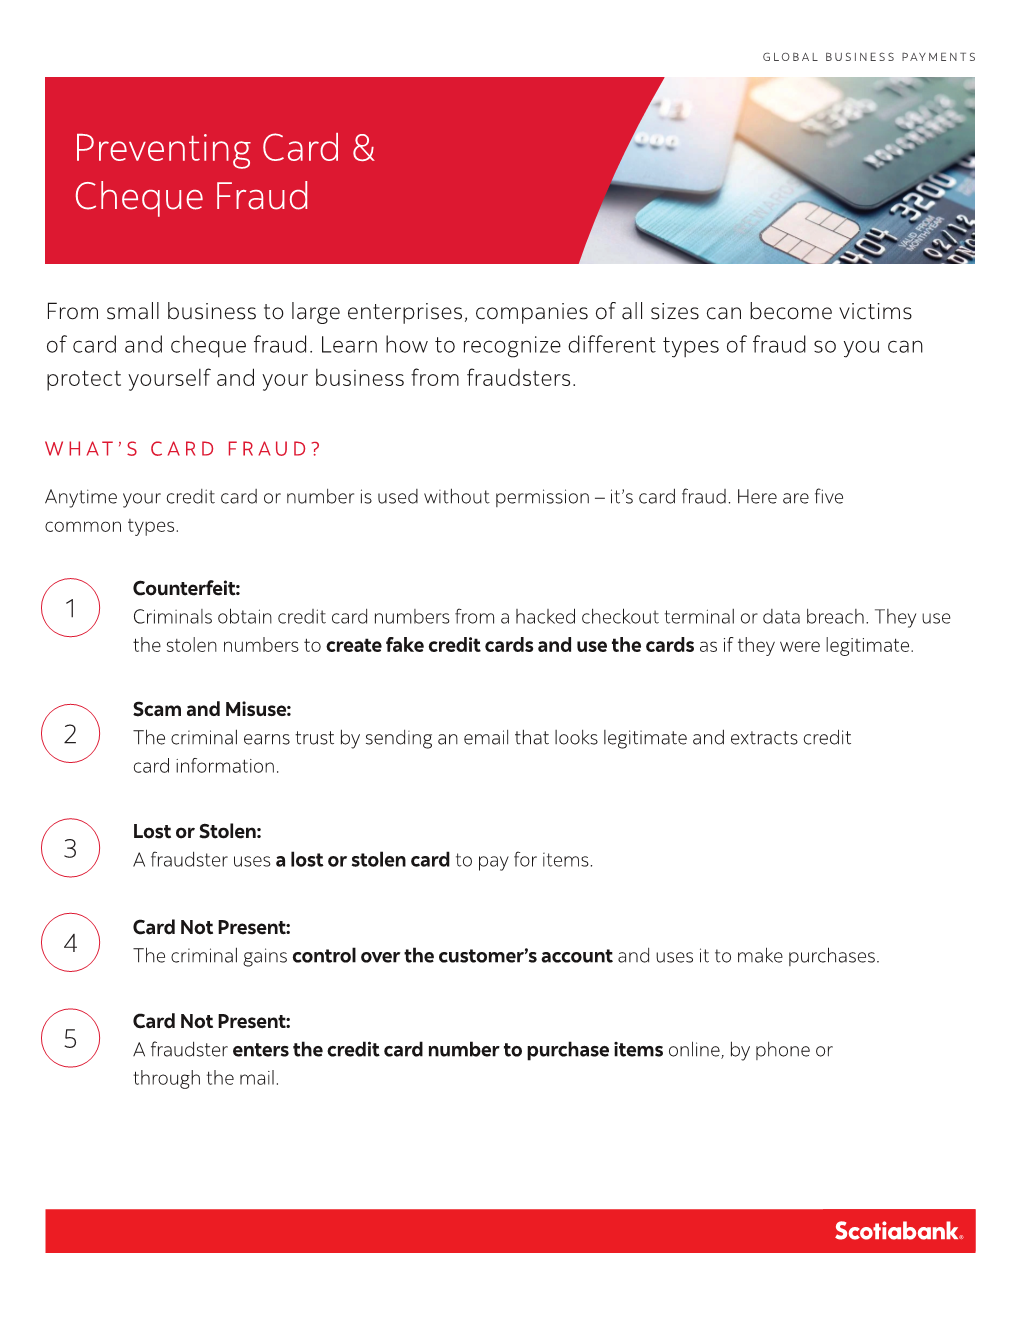 Preventing Card & Cheque Fraud